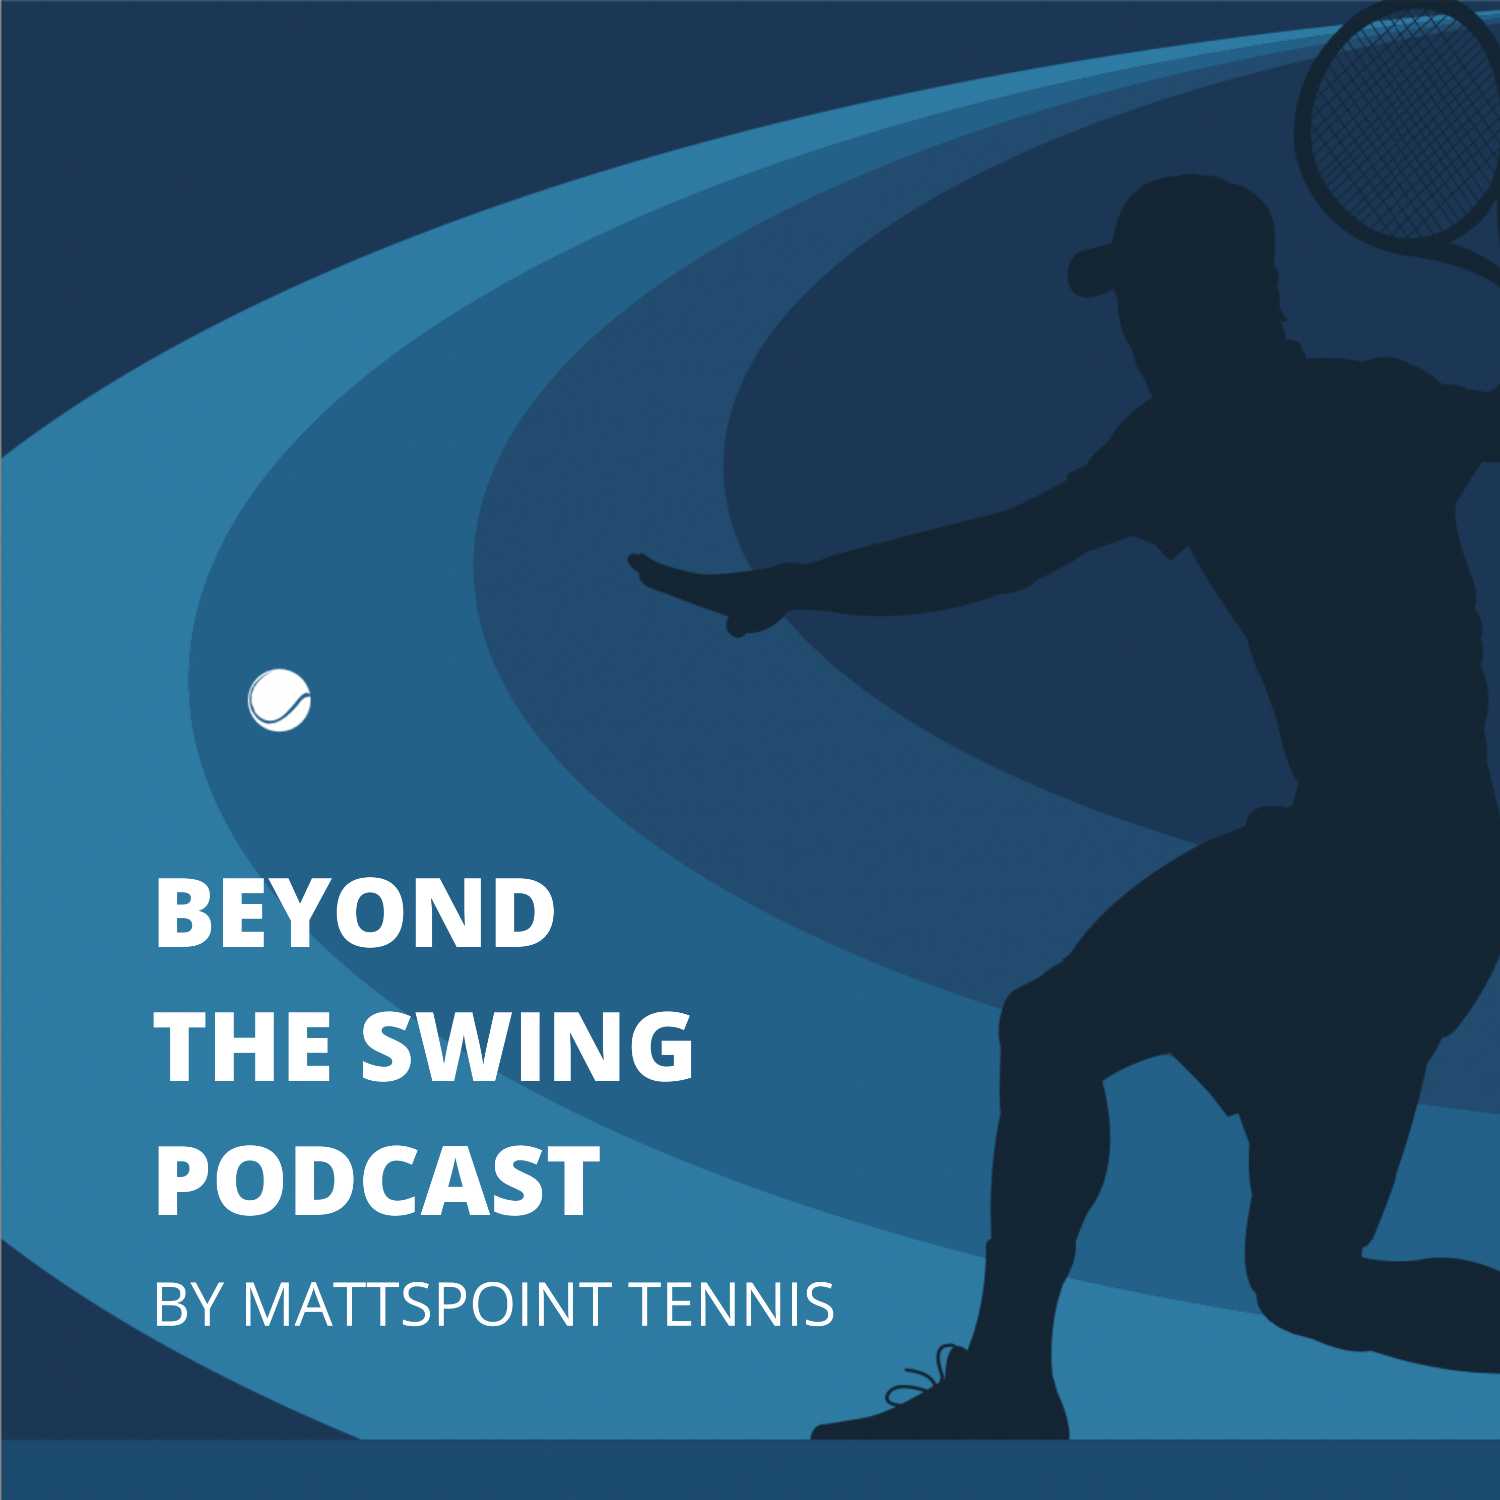 Beyond the Swing Podcast